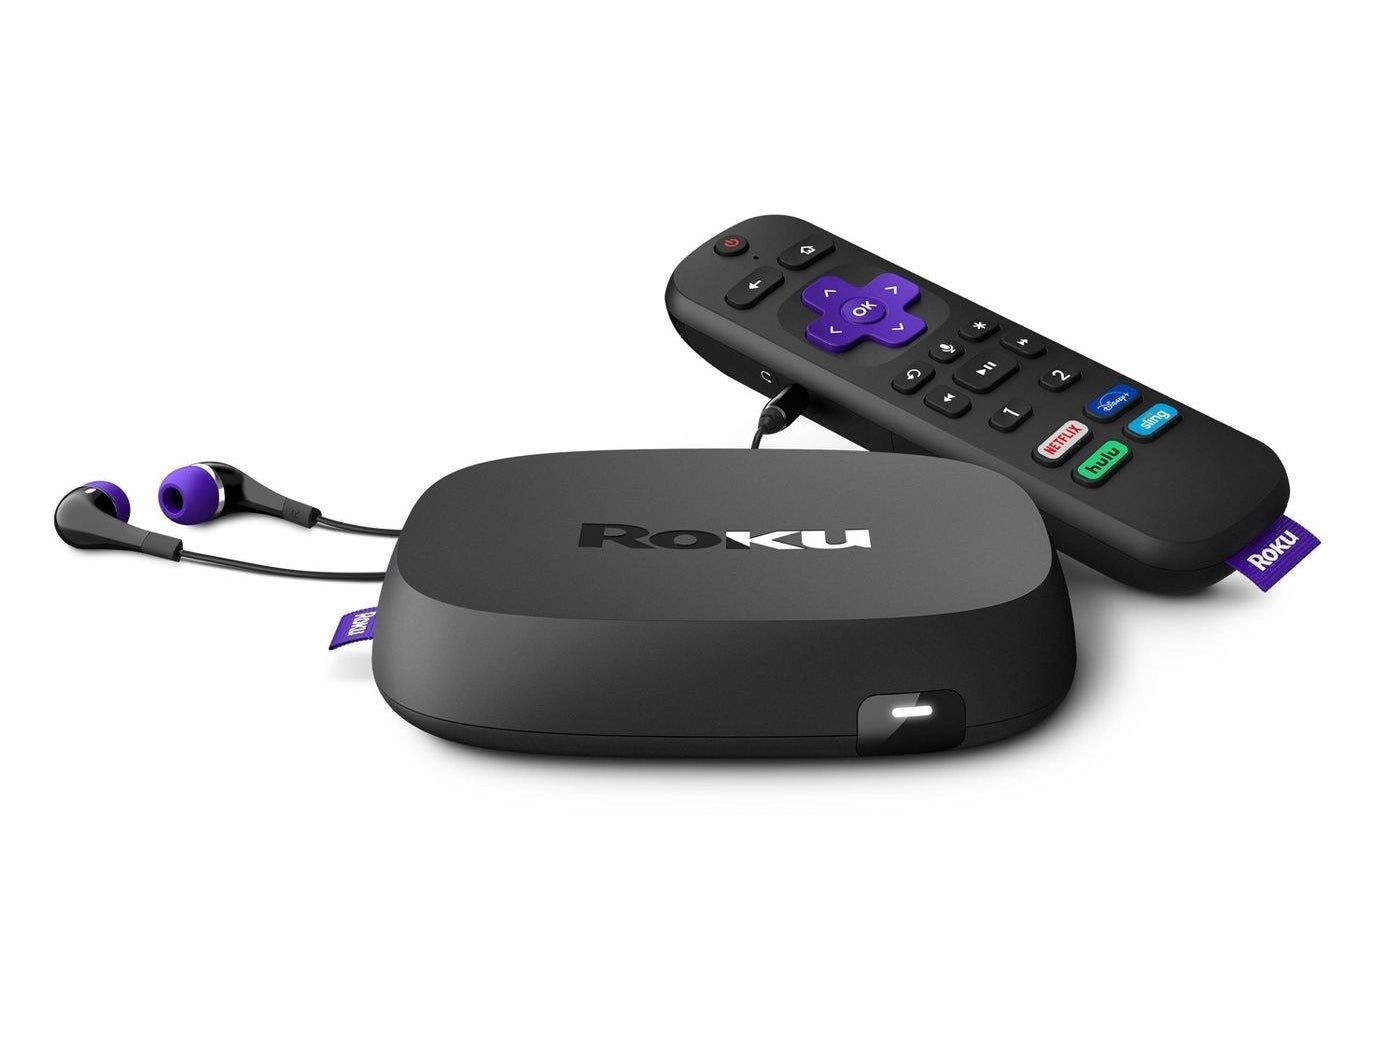 The Roku, and remote, shown with headphones plugged in.